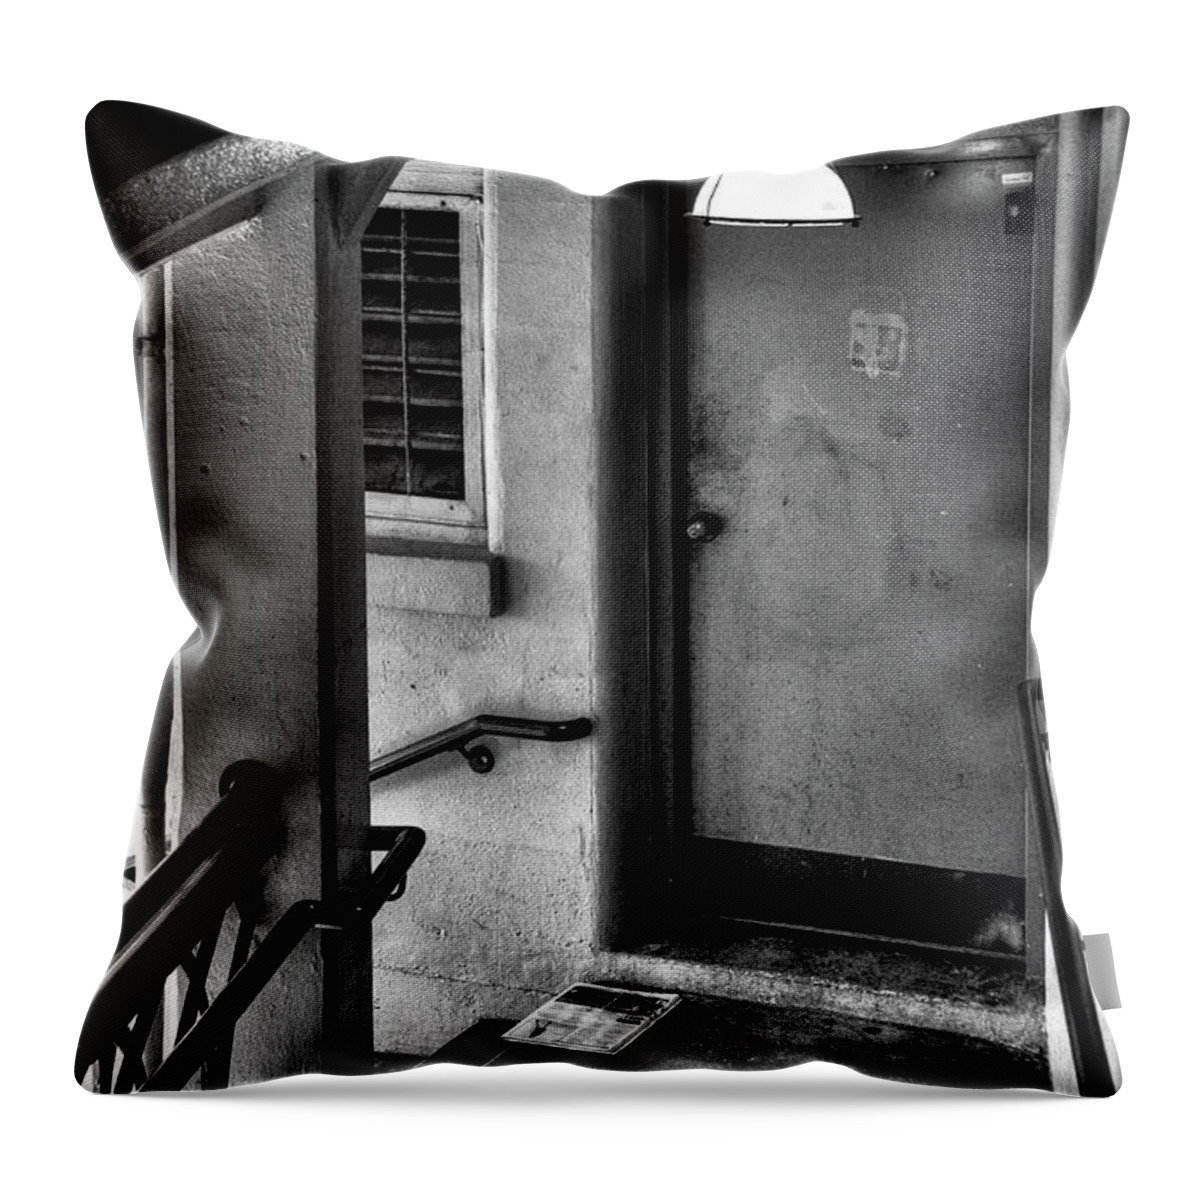 The Newspaper Throw Pillow featuring the photograph The Newspaper by David Patterson